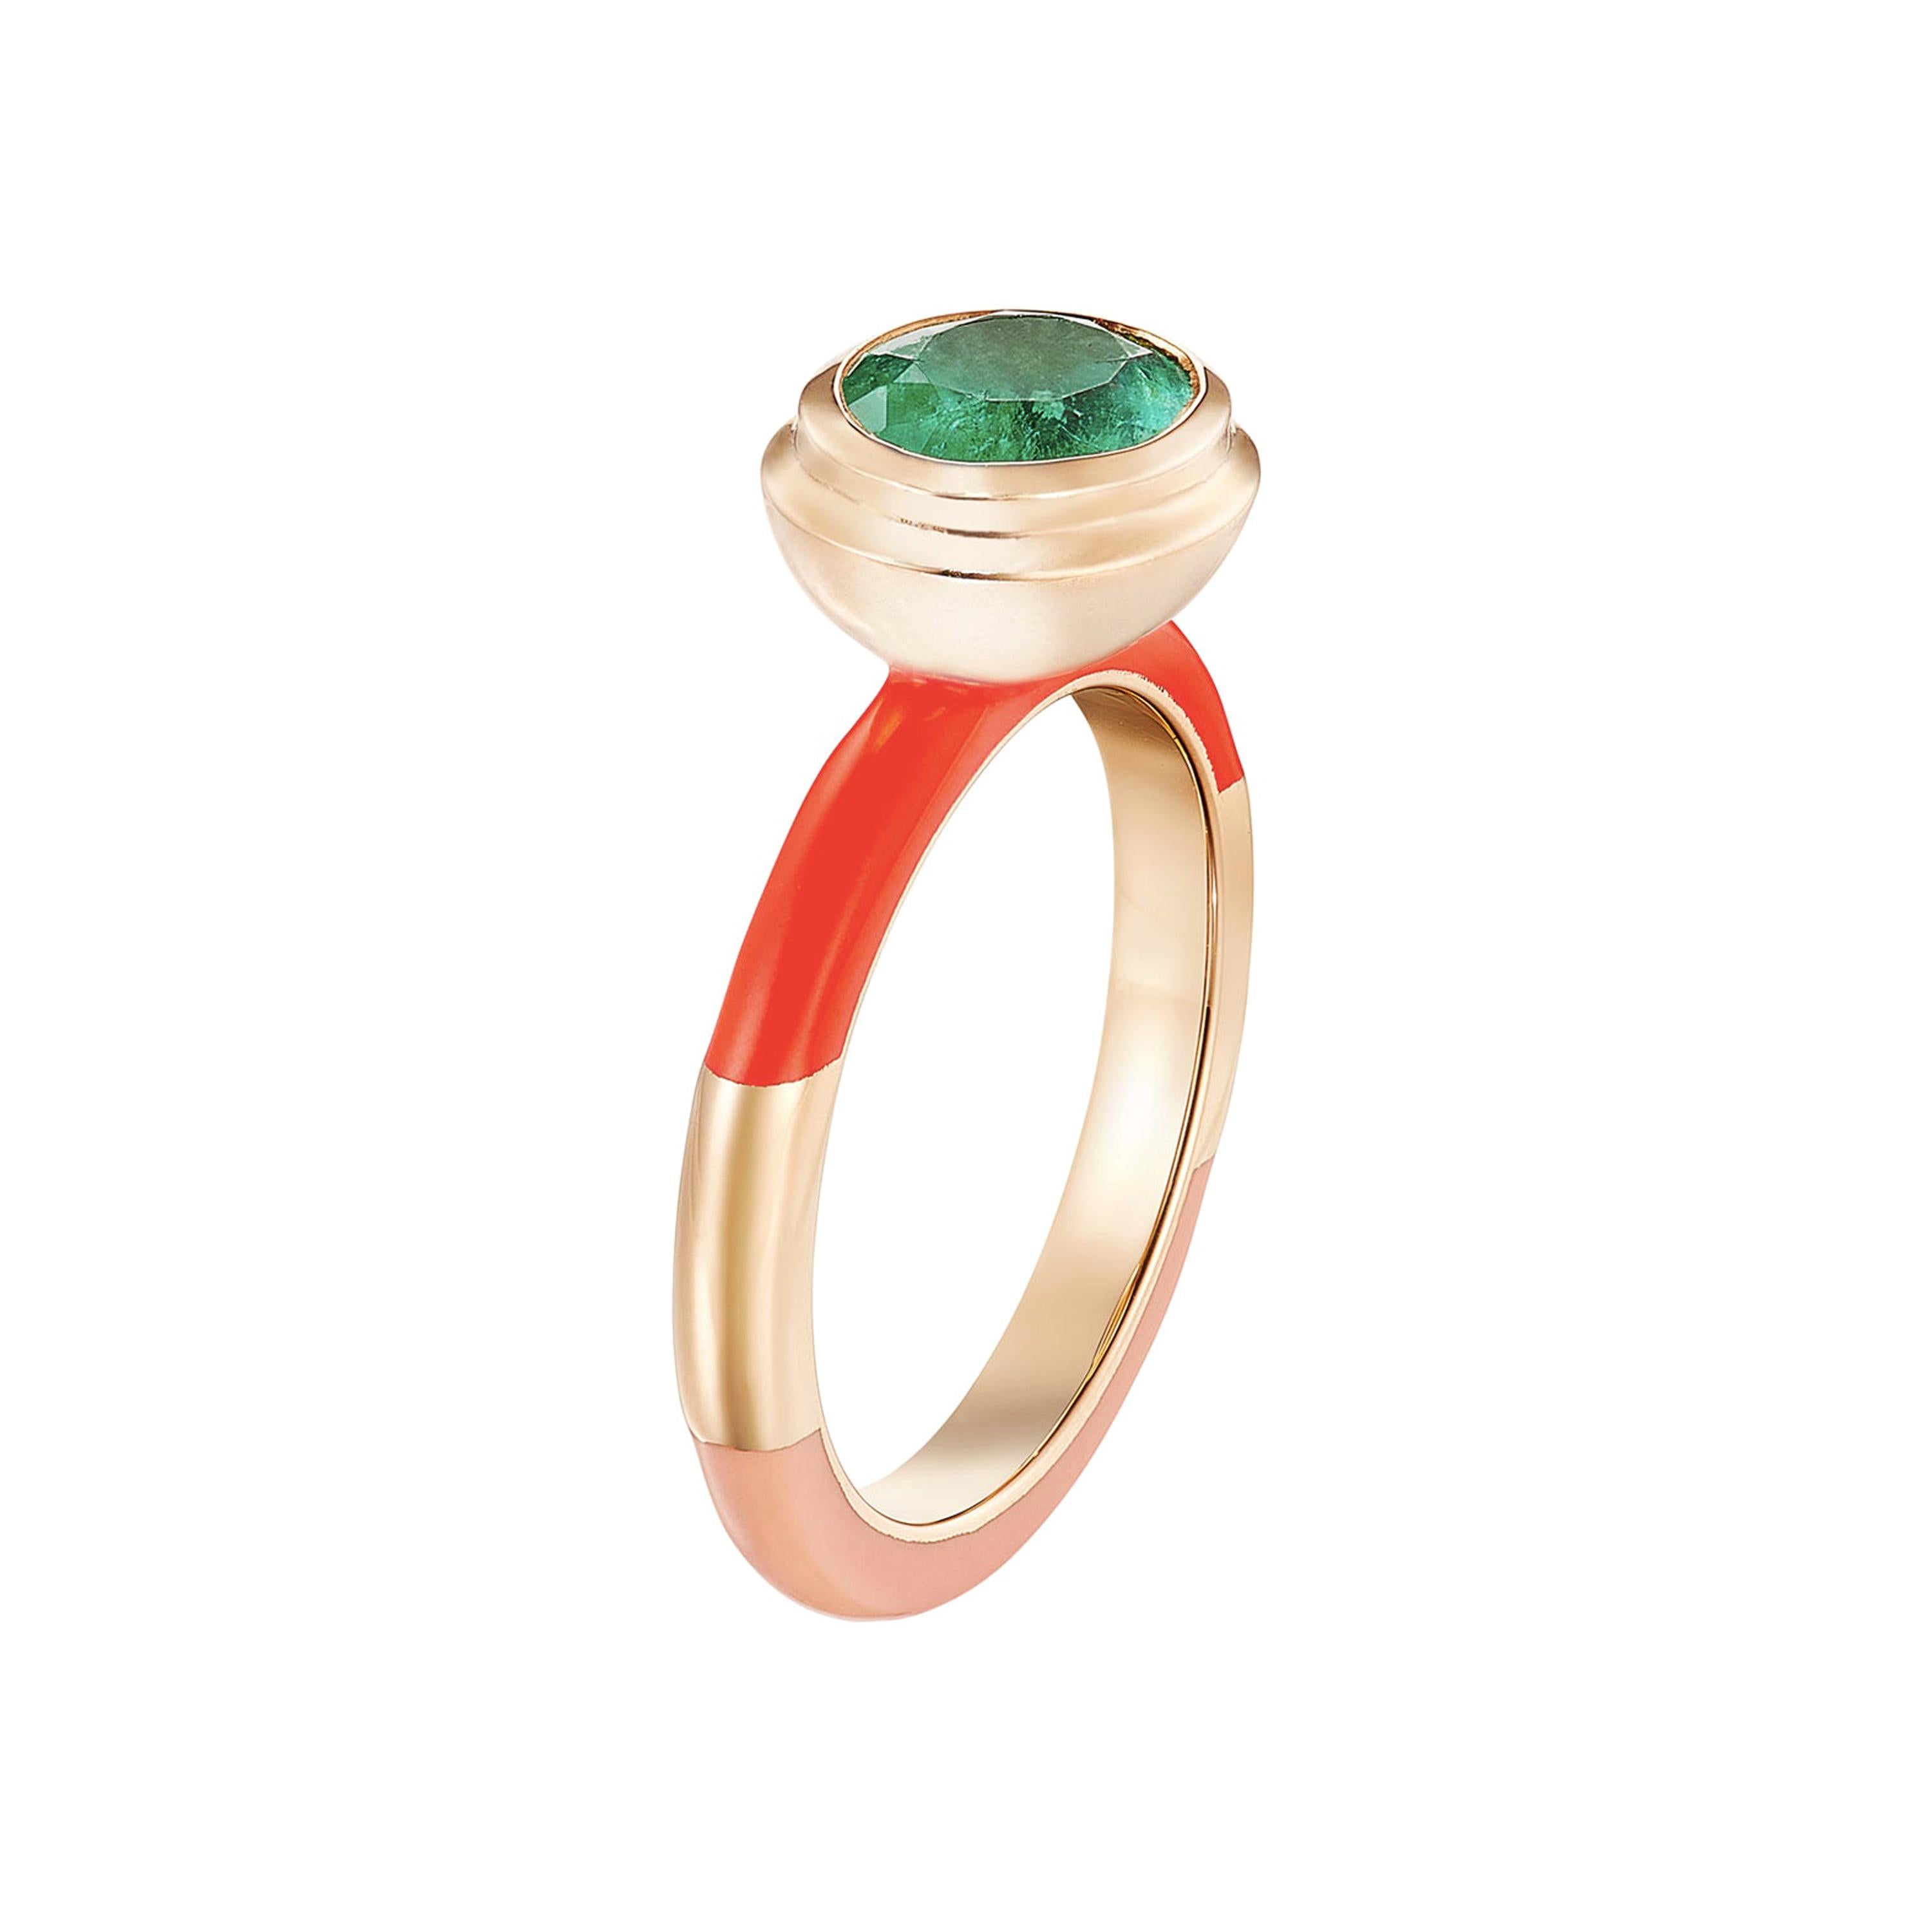 14 Karat Yellow Gold, Lacquer Enamel, Emerald Candy Lacquer Emerald Ring For Sale